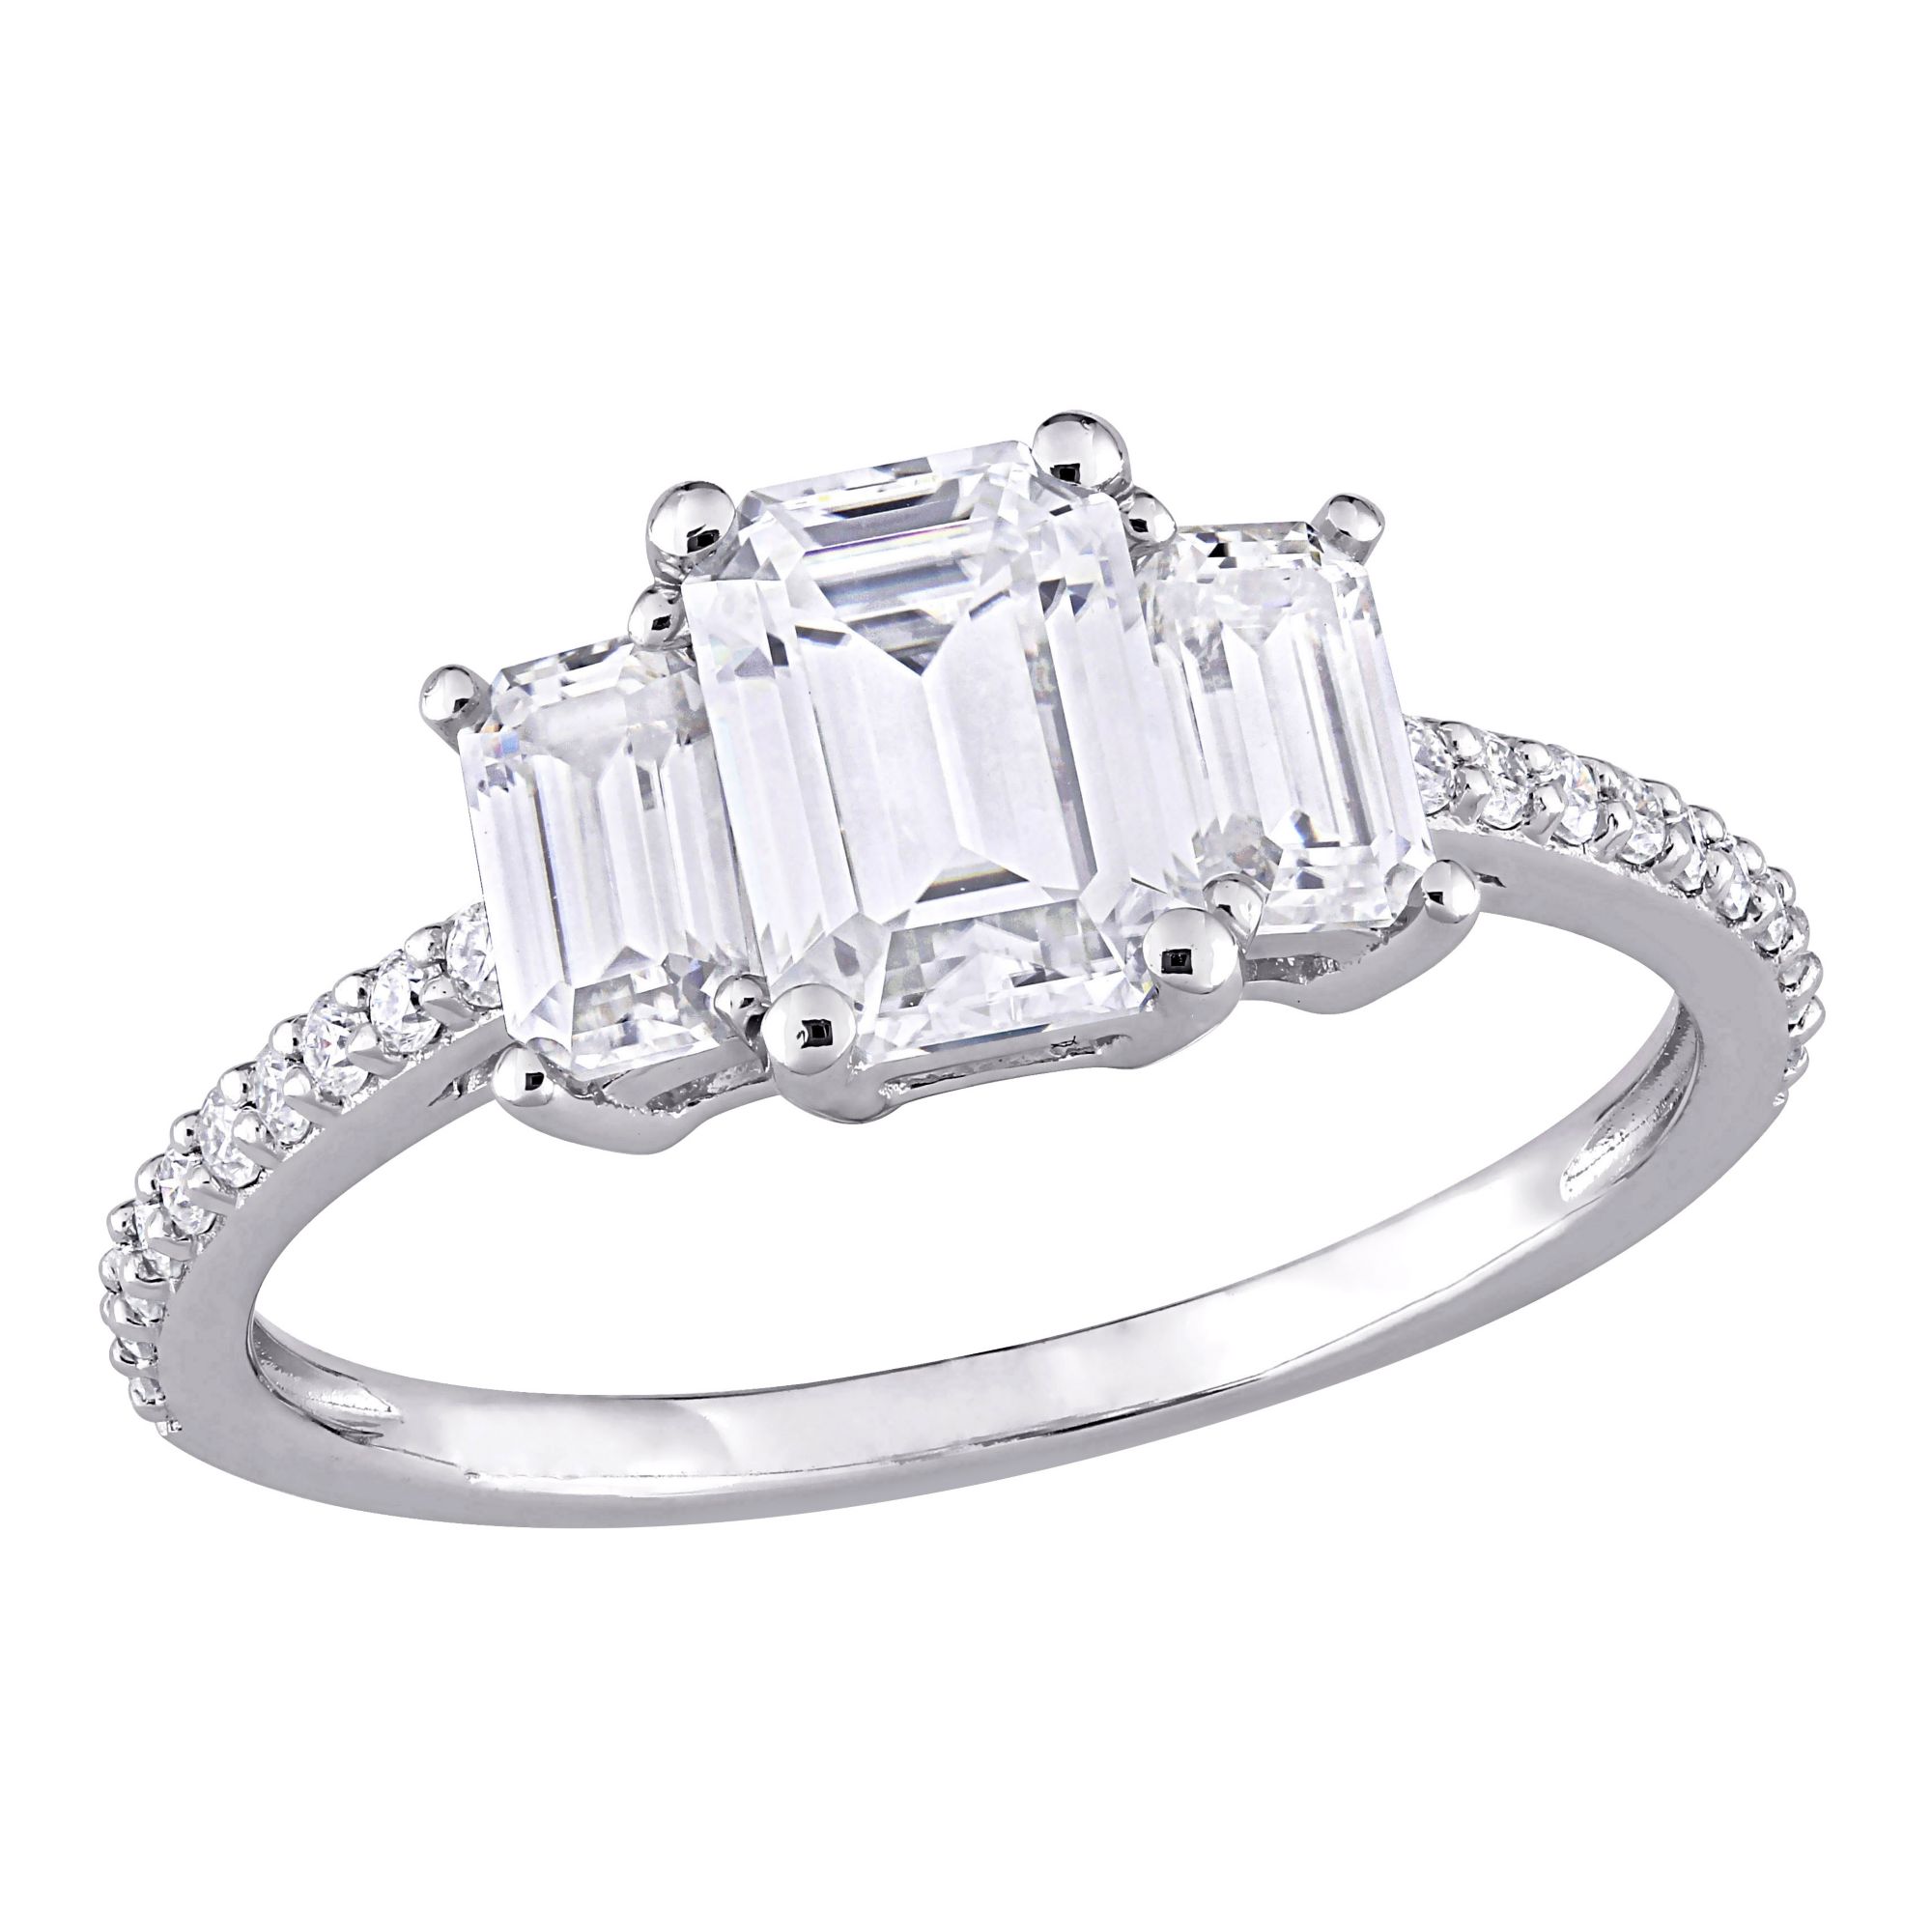 1.75 ct. DEW Created Moissanite Emerald Cut 3-Stone Engagement Ring in 10k White Gold - Size 9